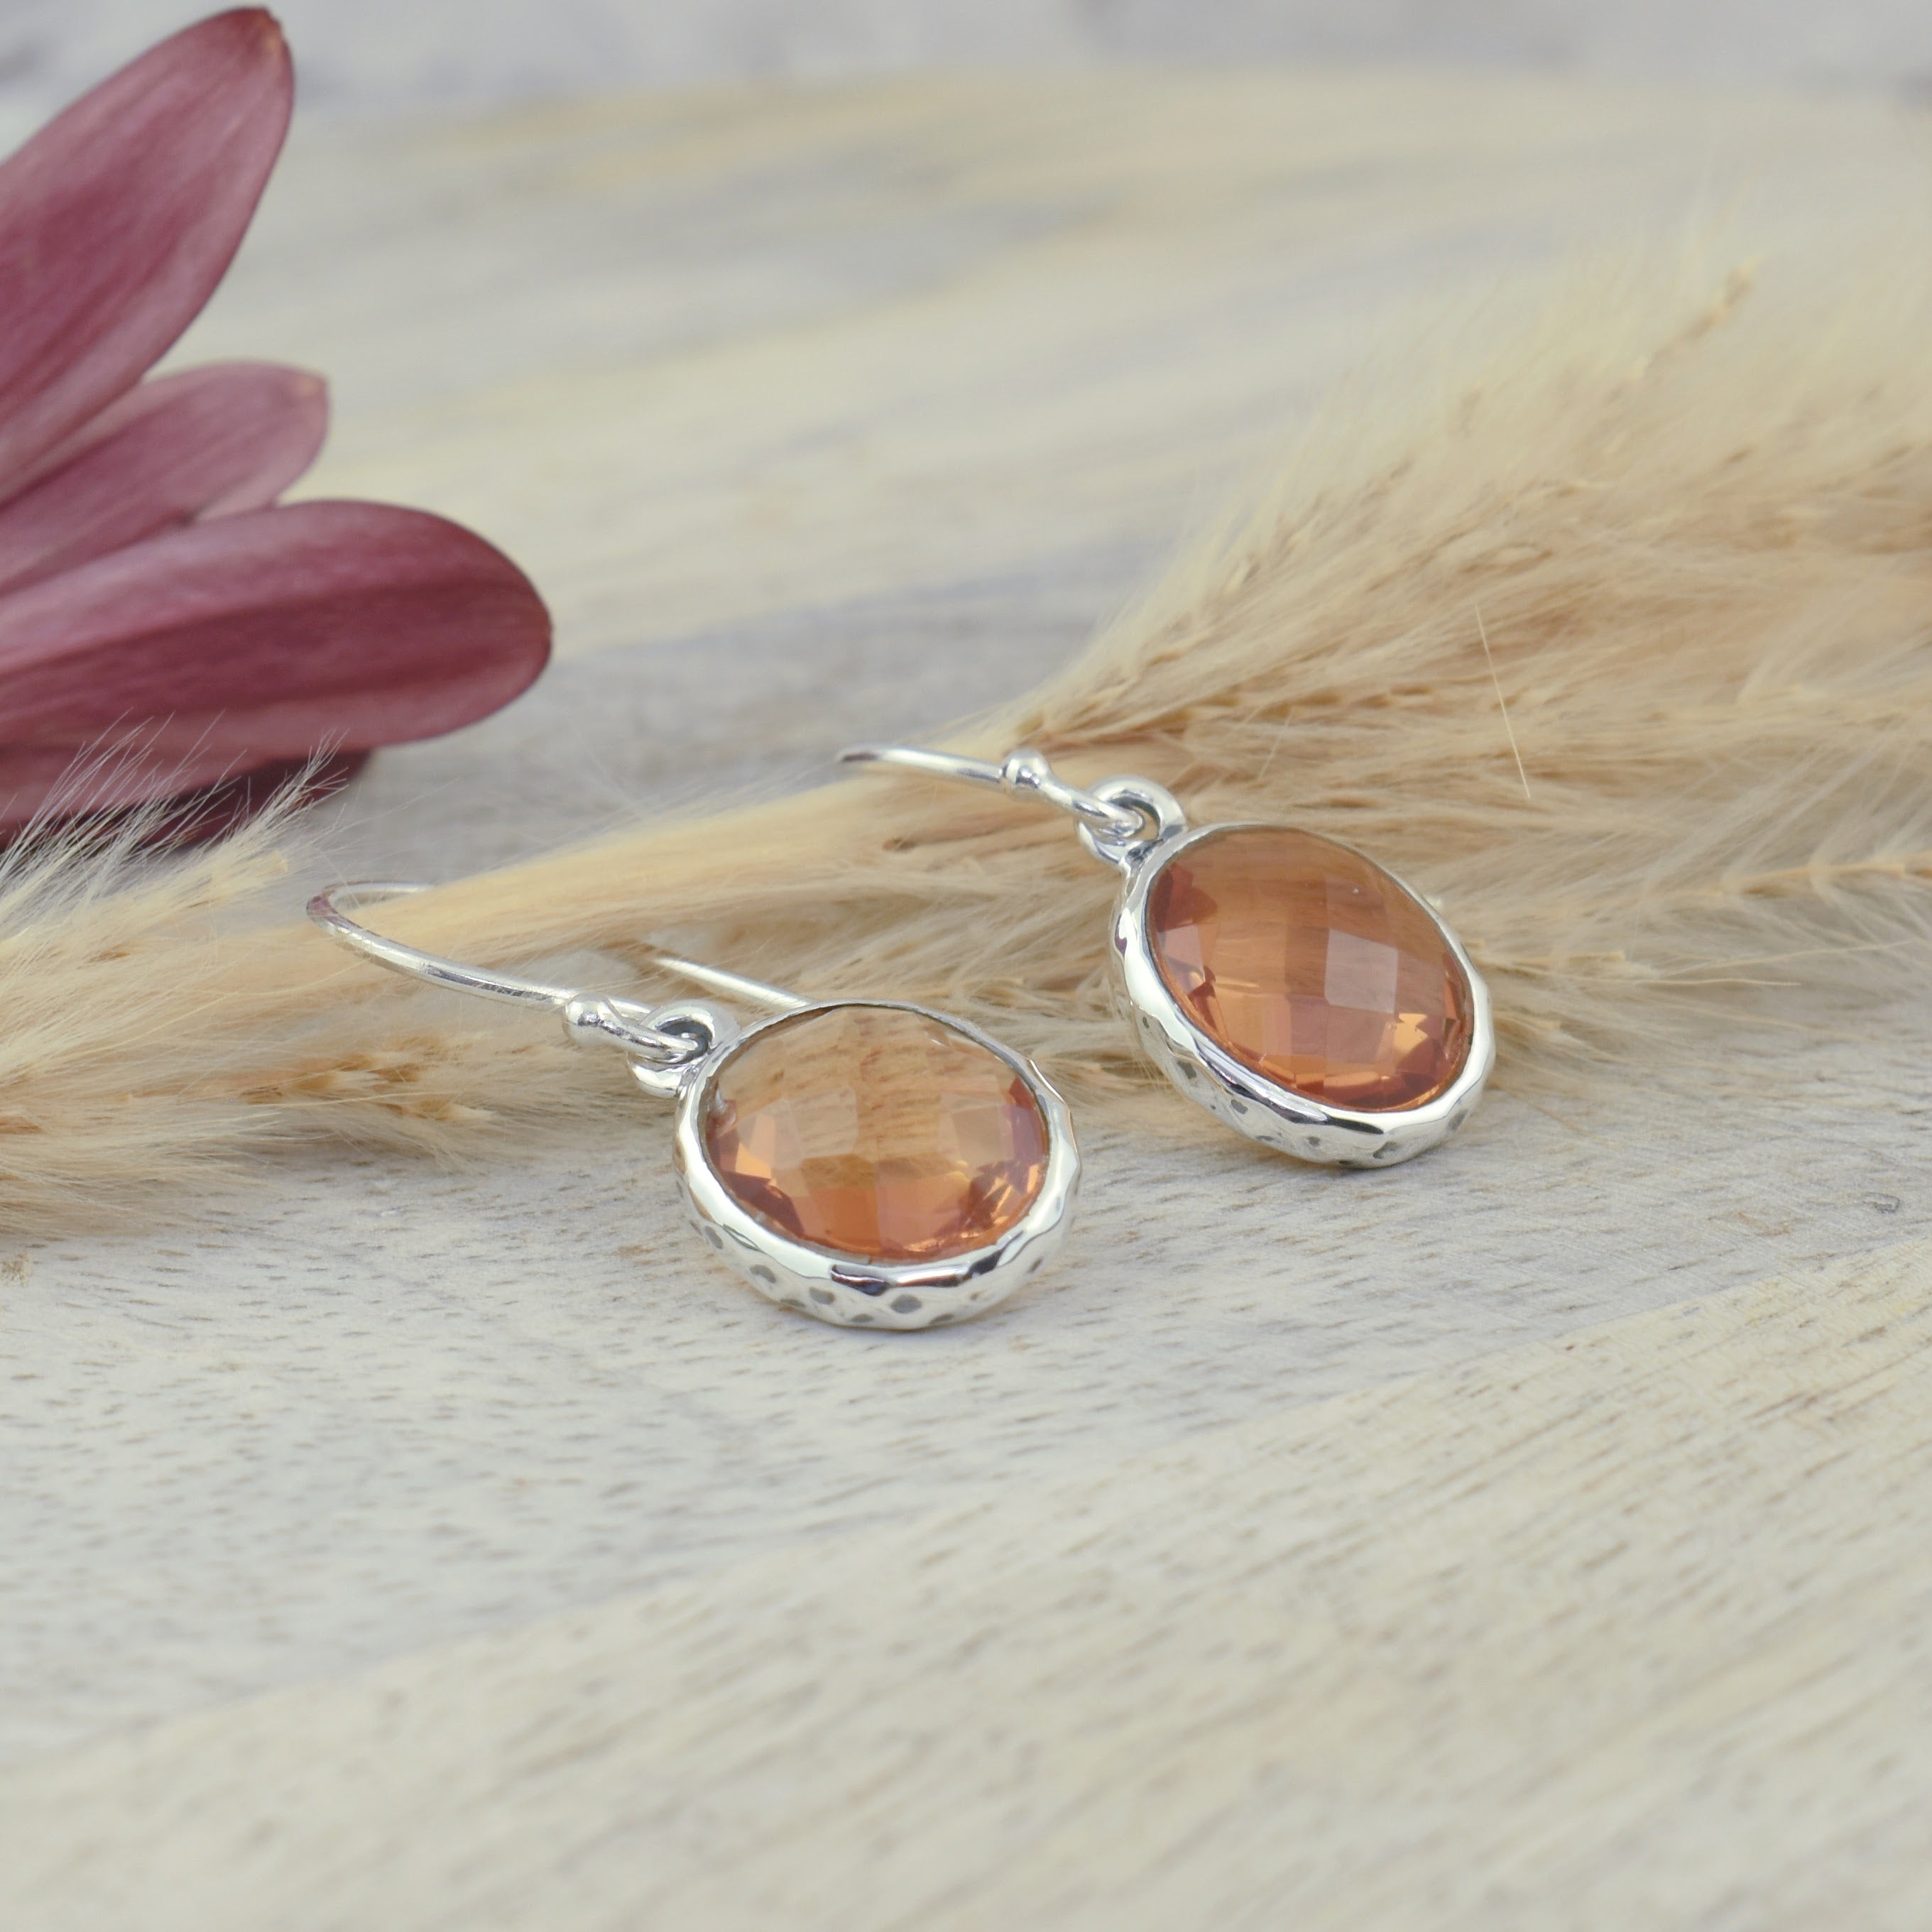 dainty silver earrings with oval amber dangles with a slight hammered finish